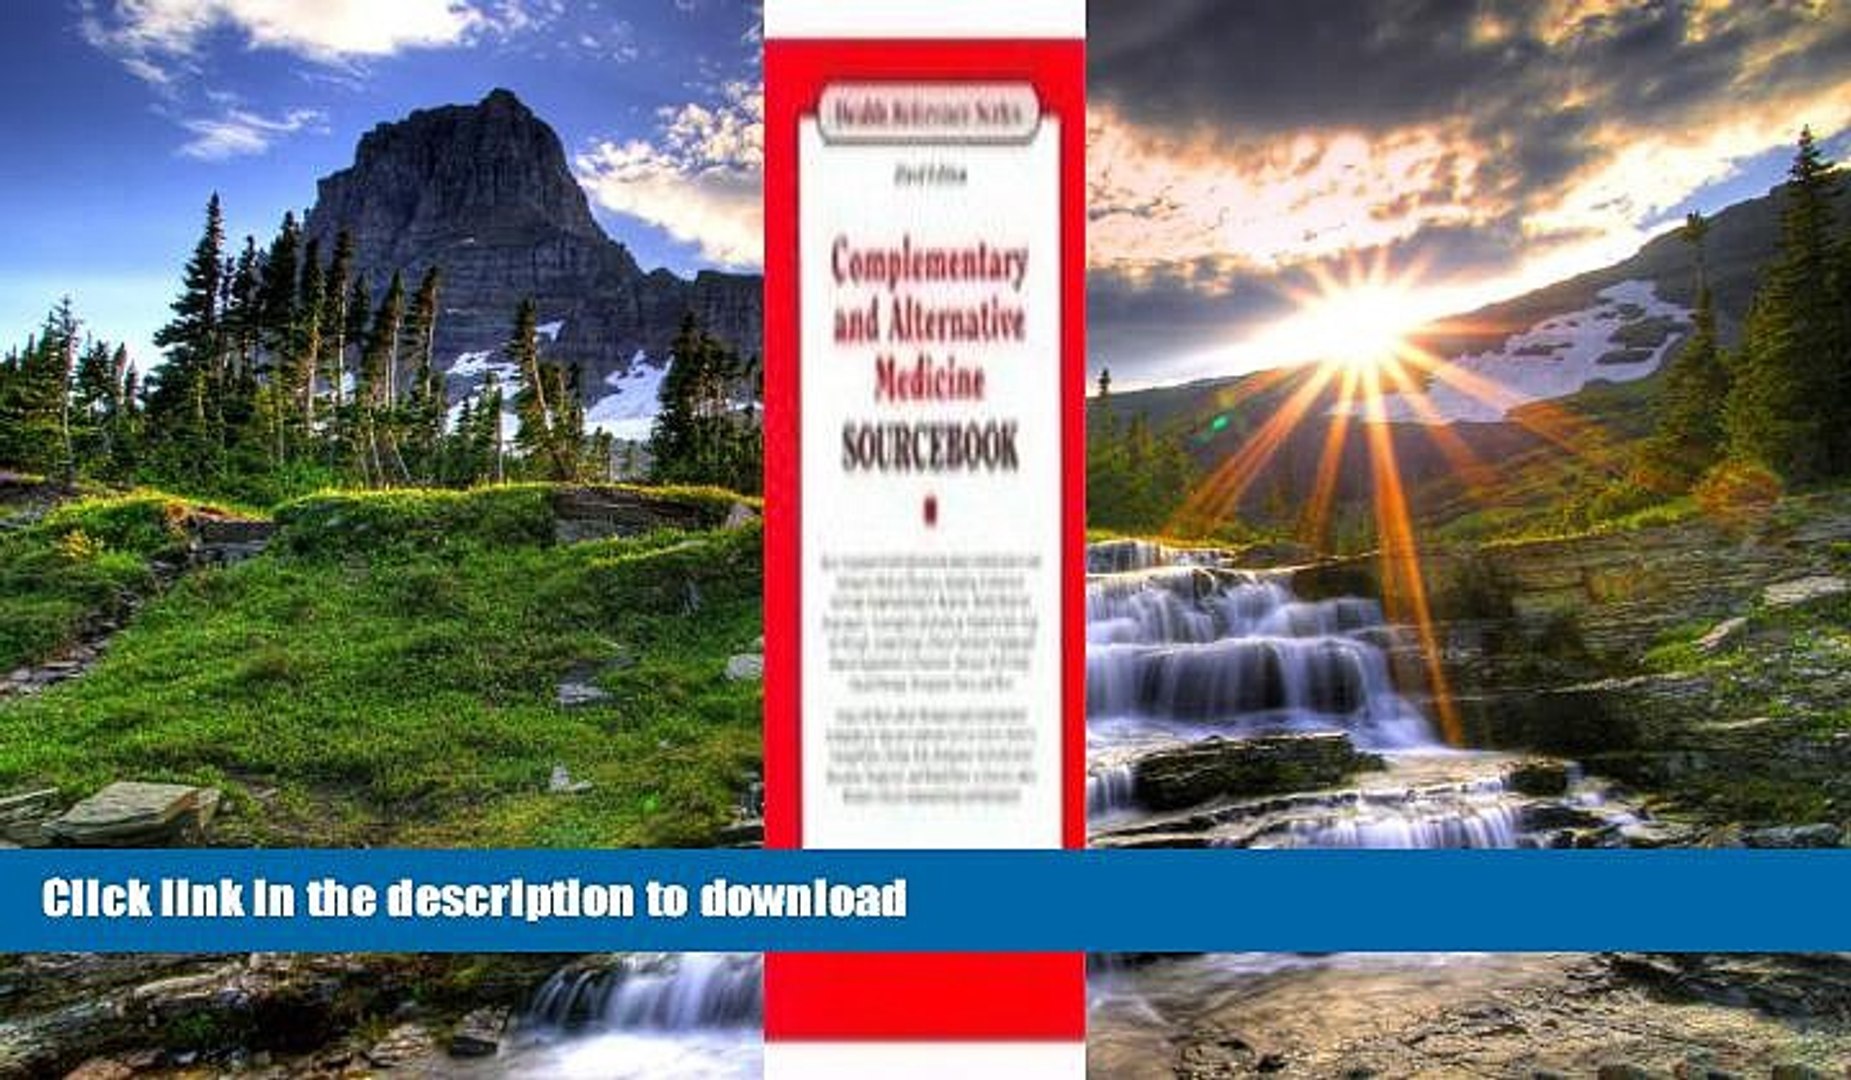 ⁣READ  Complementary And Alternative Medicine Sourcebook: Basic Consumer Health Information About